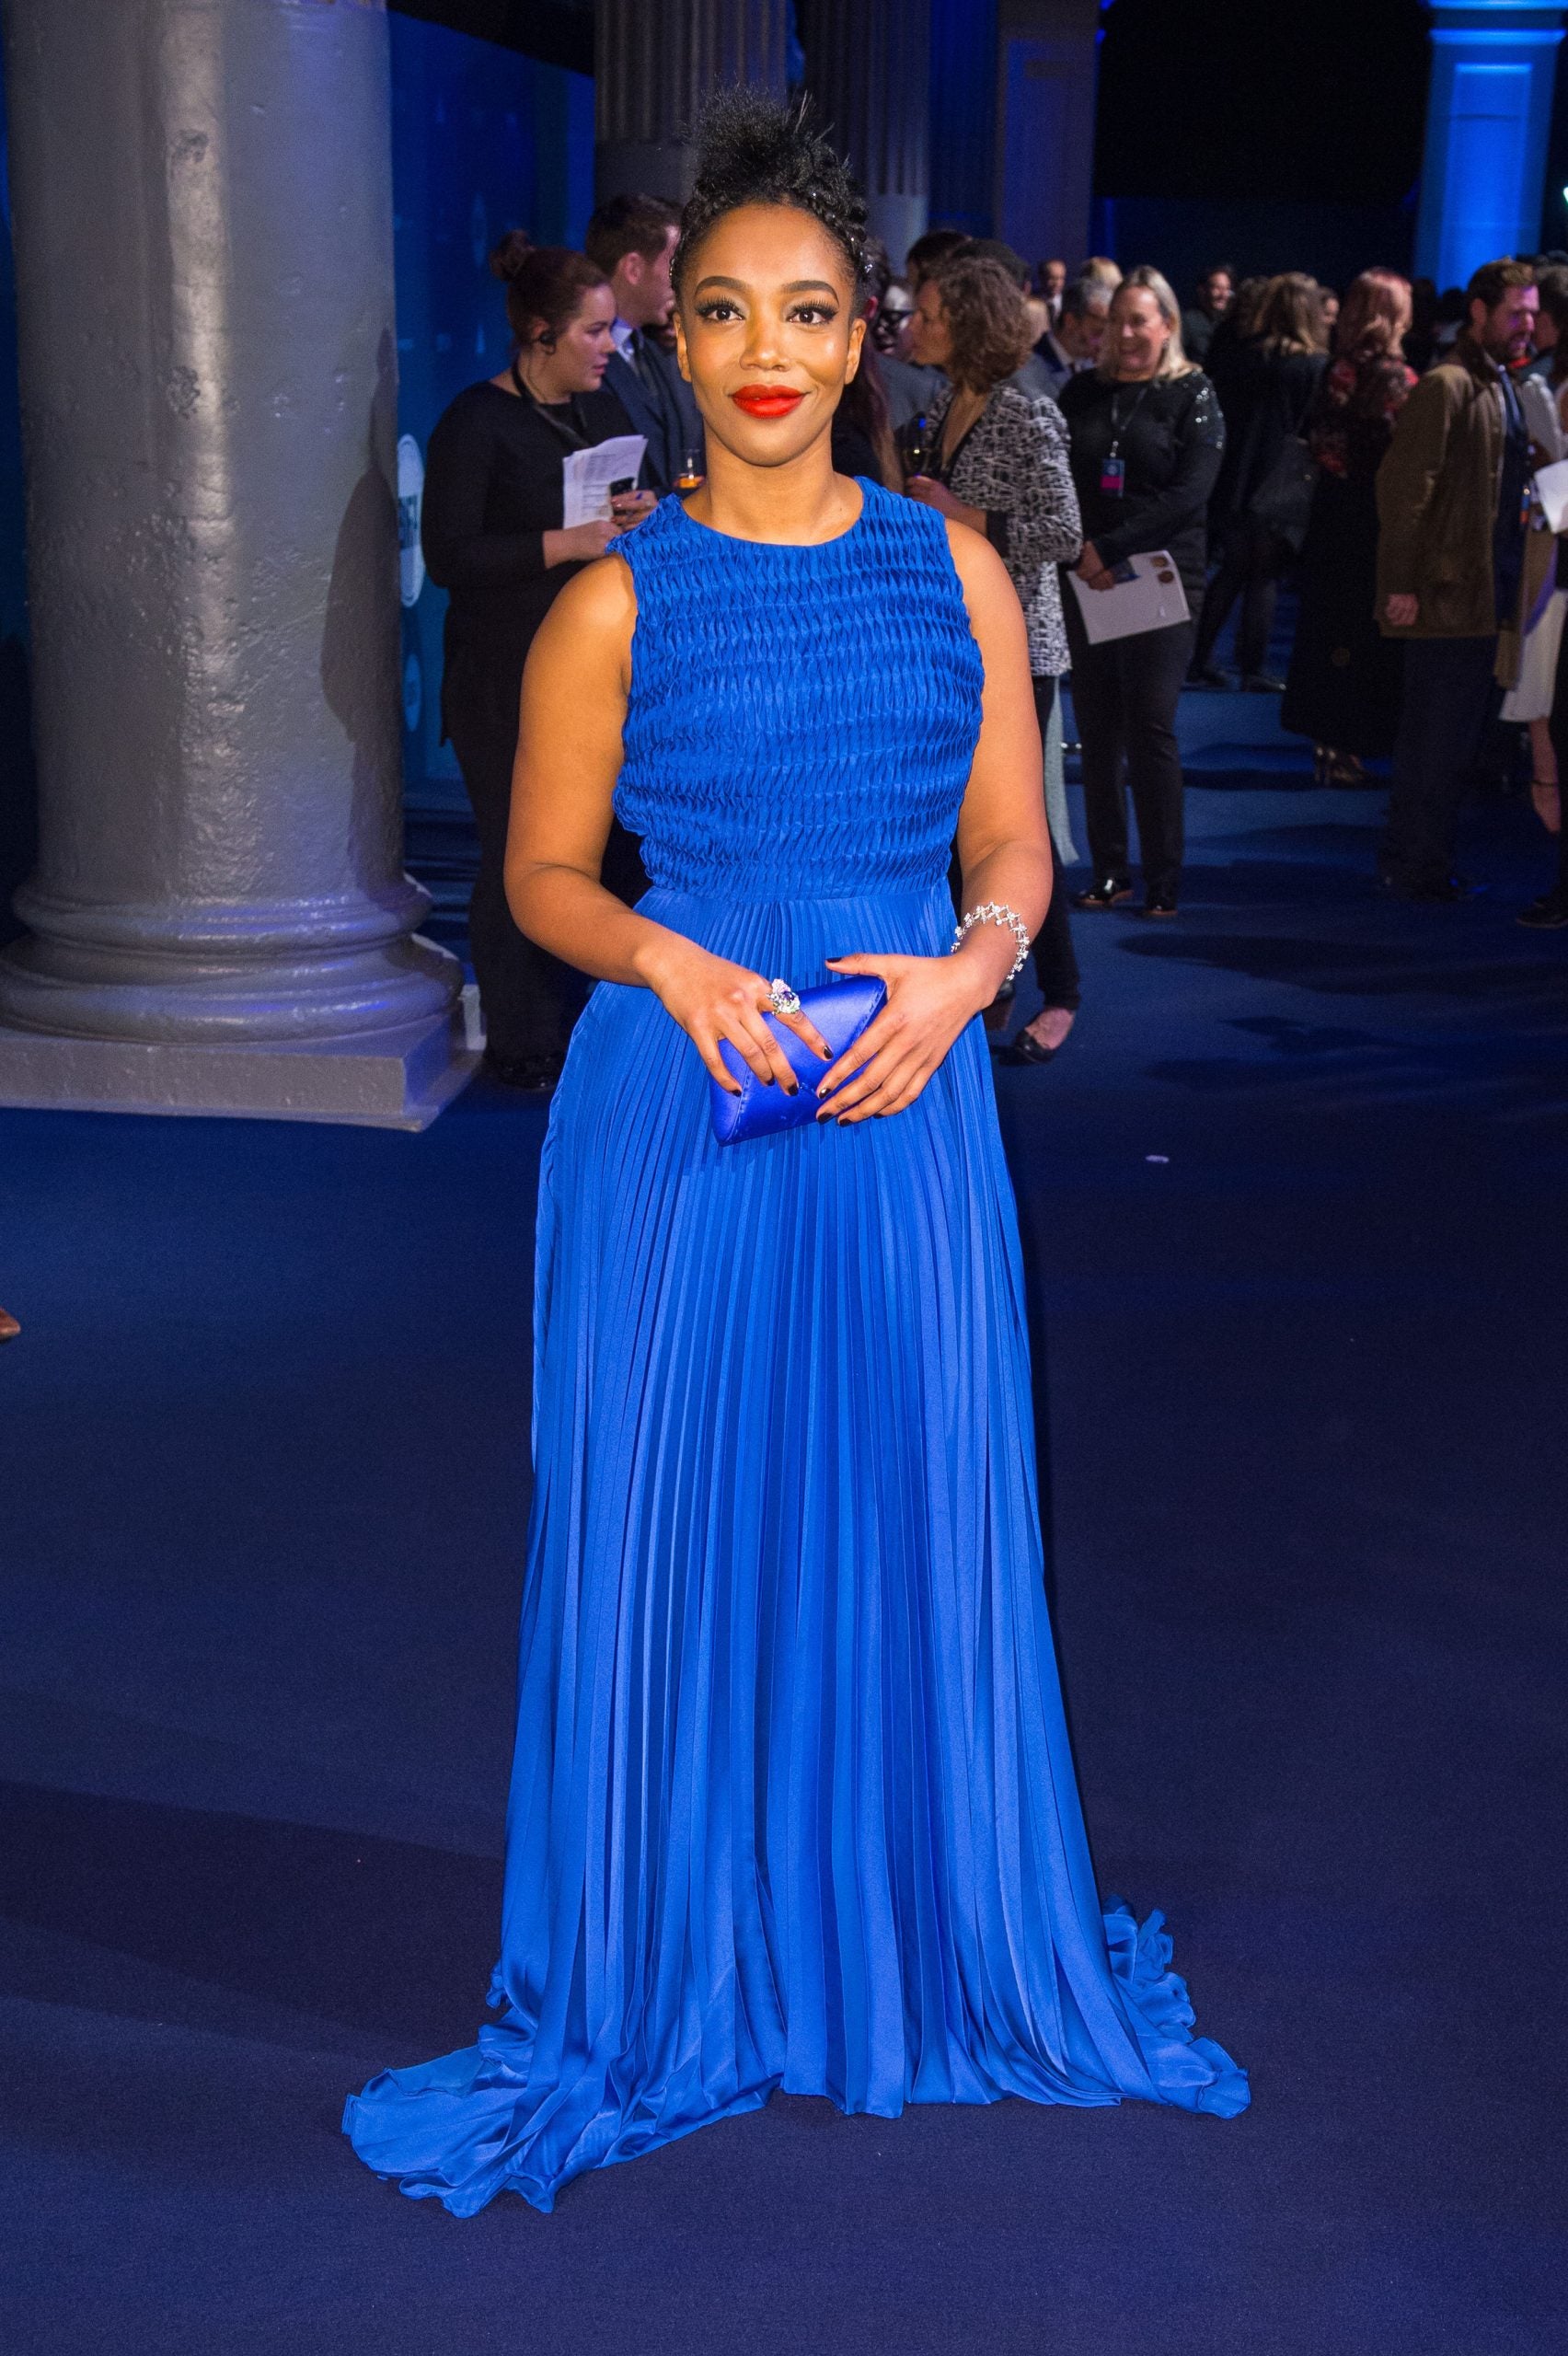 Style Star: Naomi Ackie's Red Carpet Style Evolution   